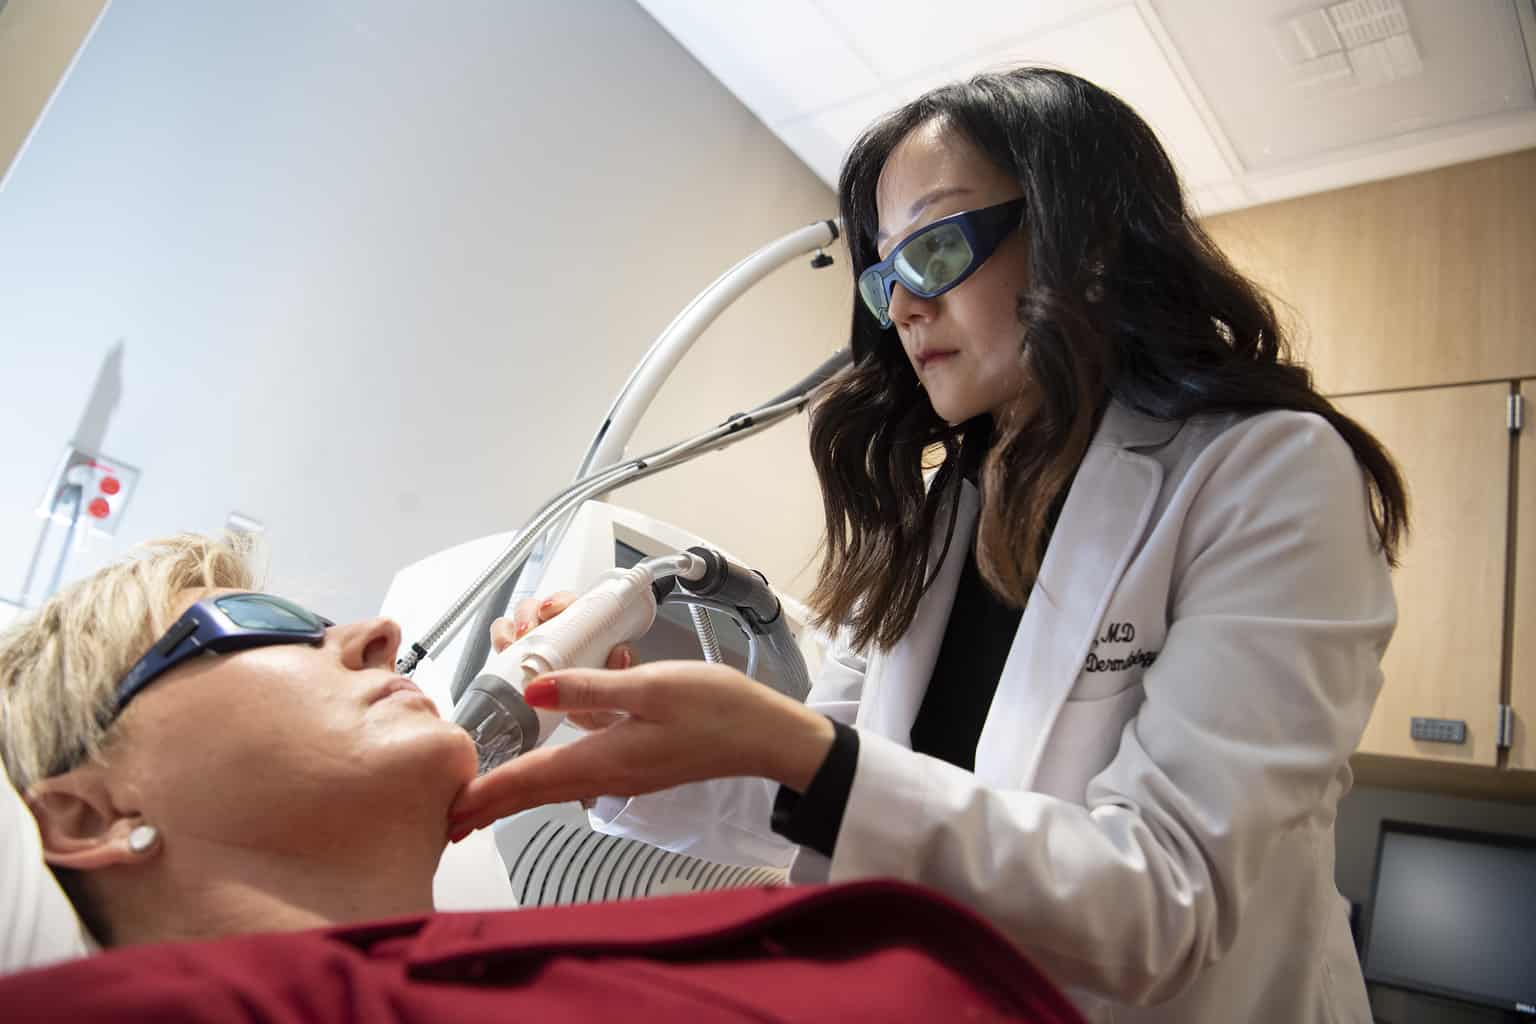 center for cosmetic dermatology dermatologist talks with patient about dermatology procedures